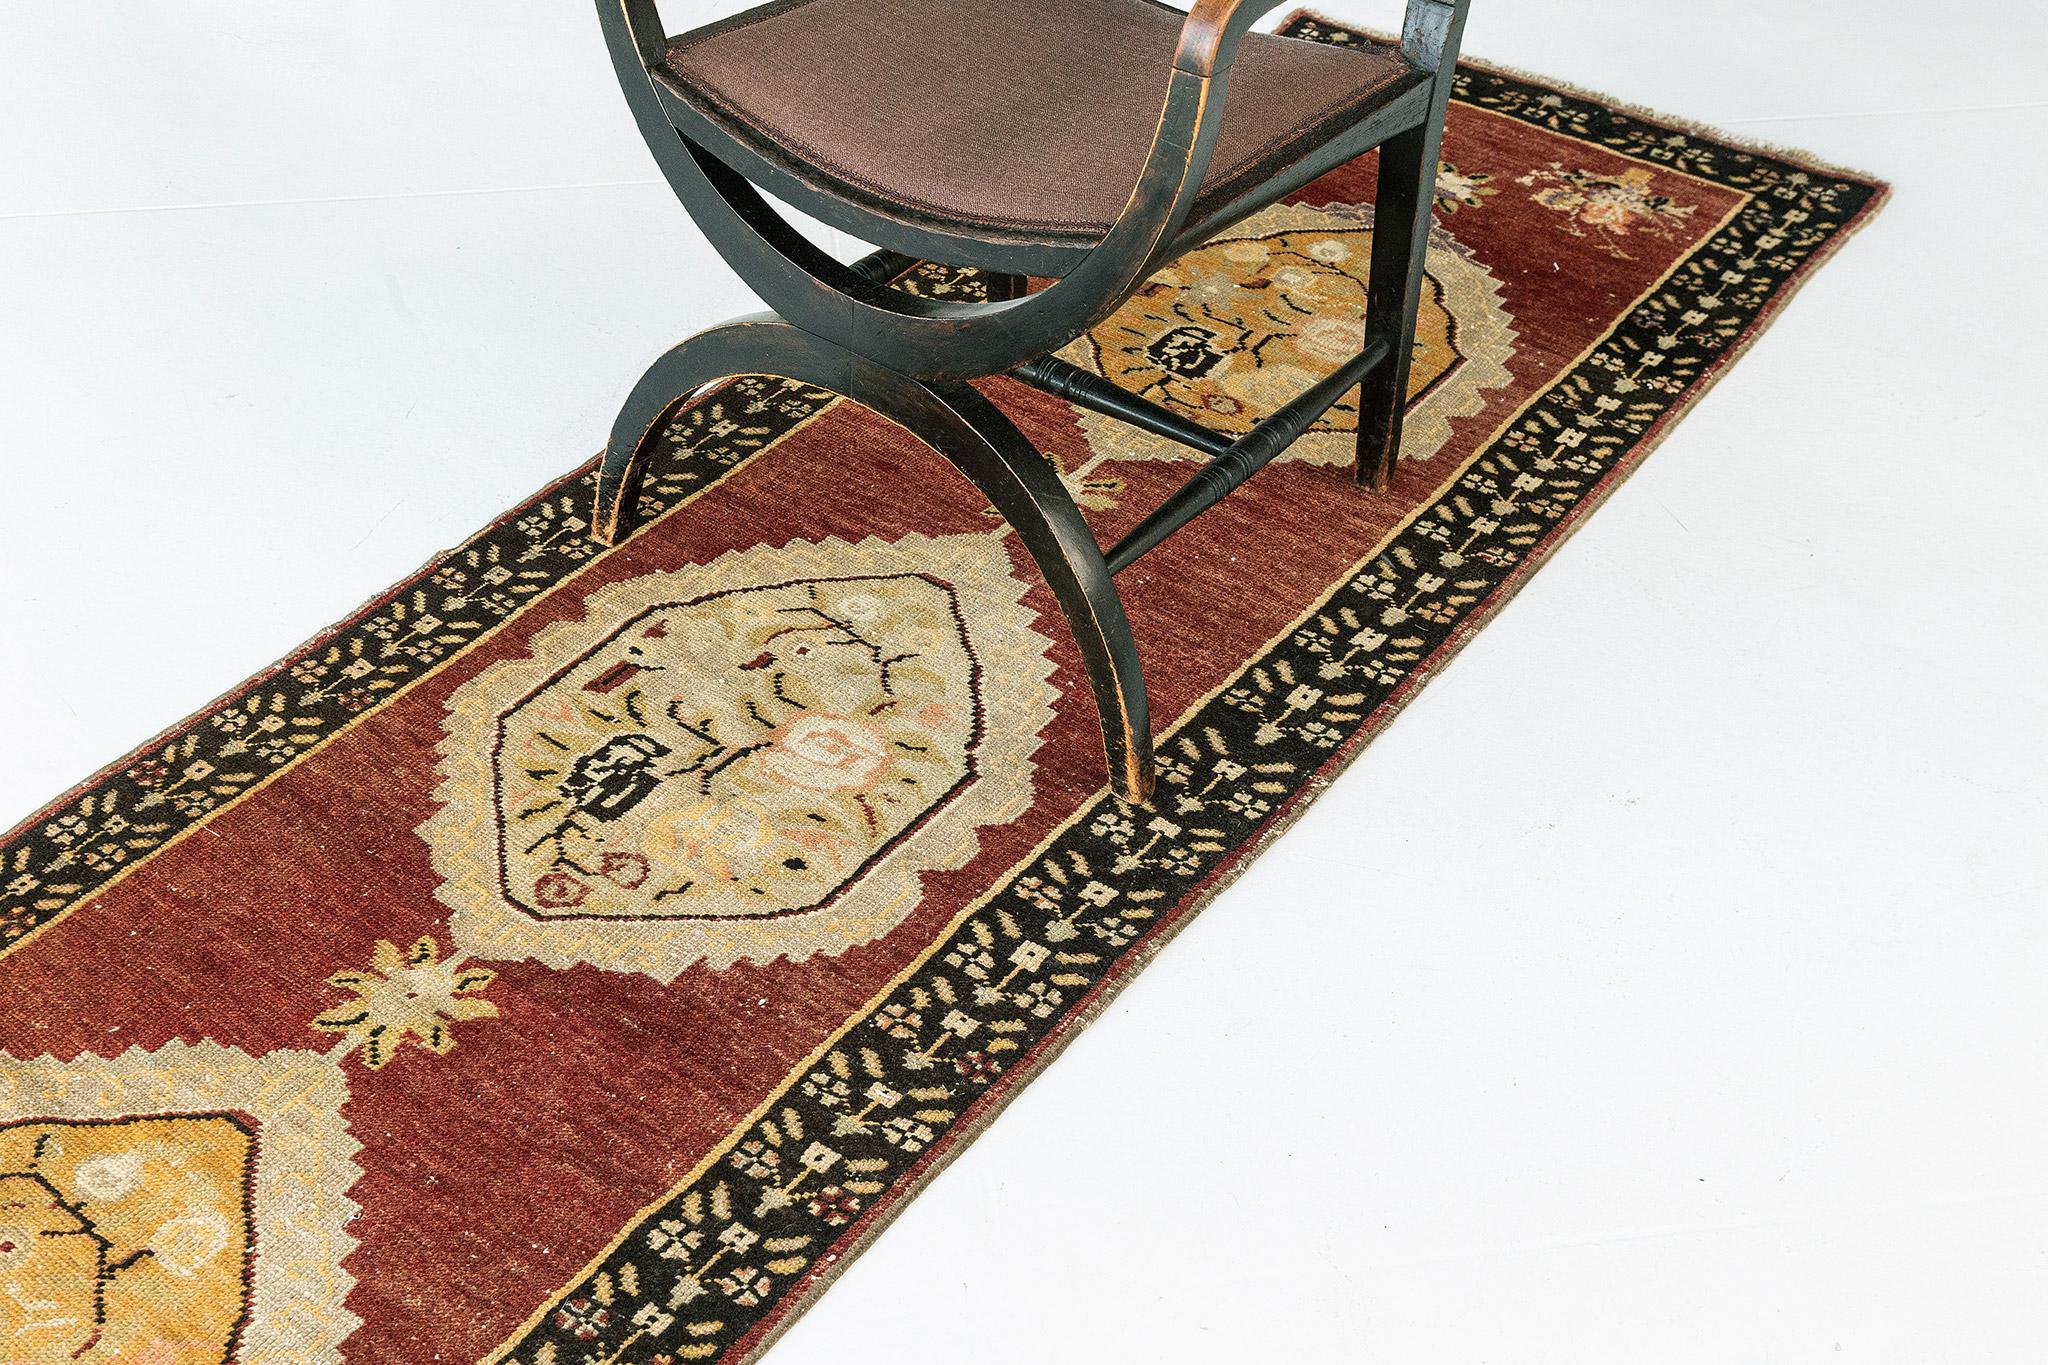 With its impressive design, rich detailing, and mesmerizing well-balanced symmetry, this vintage Turkish Anatolian runner would bring a sense of classic sophistication to nearly any space. The abrashed fire brick colored field features an three